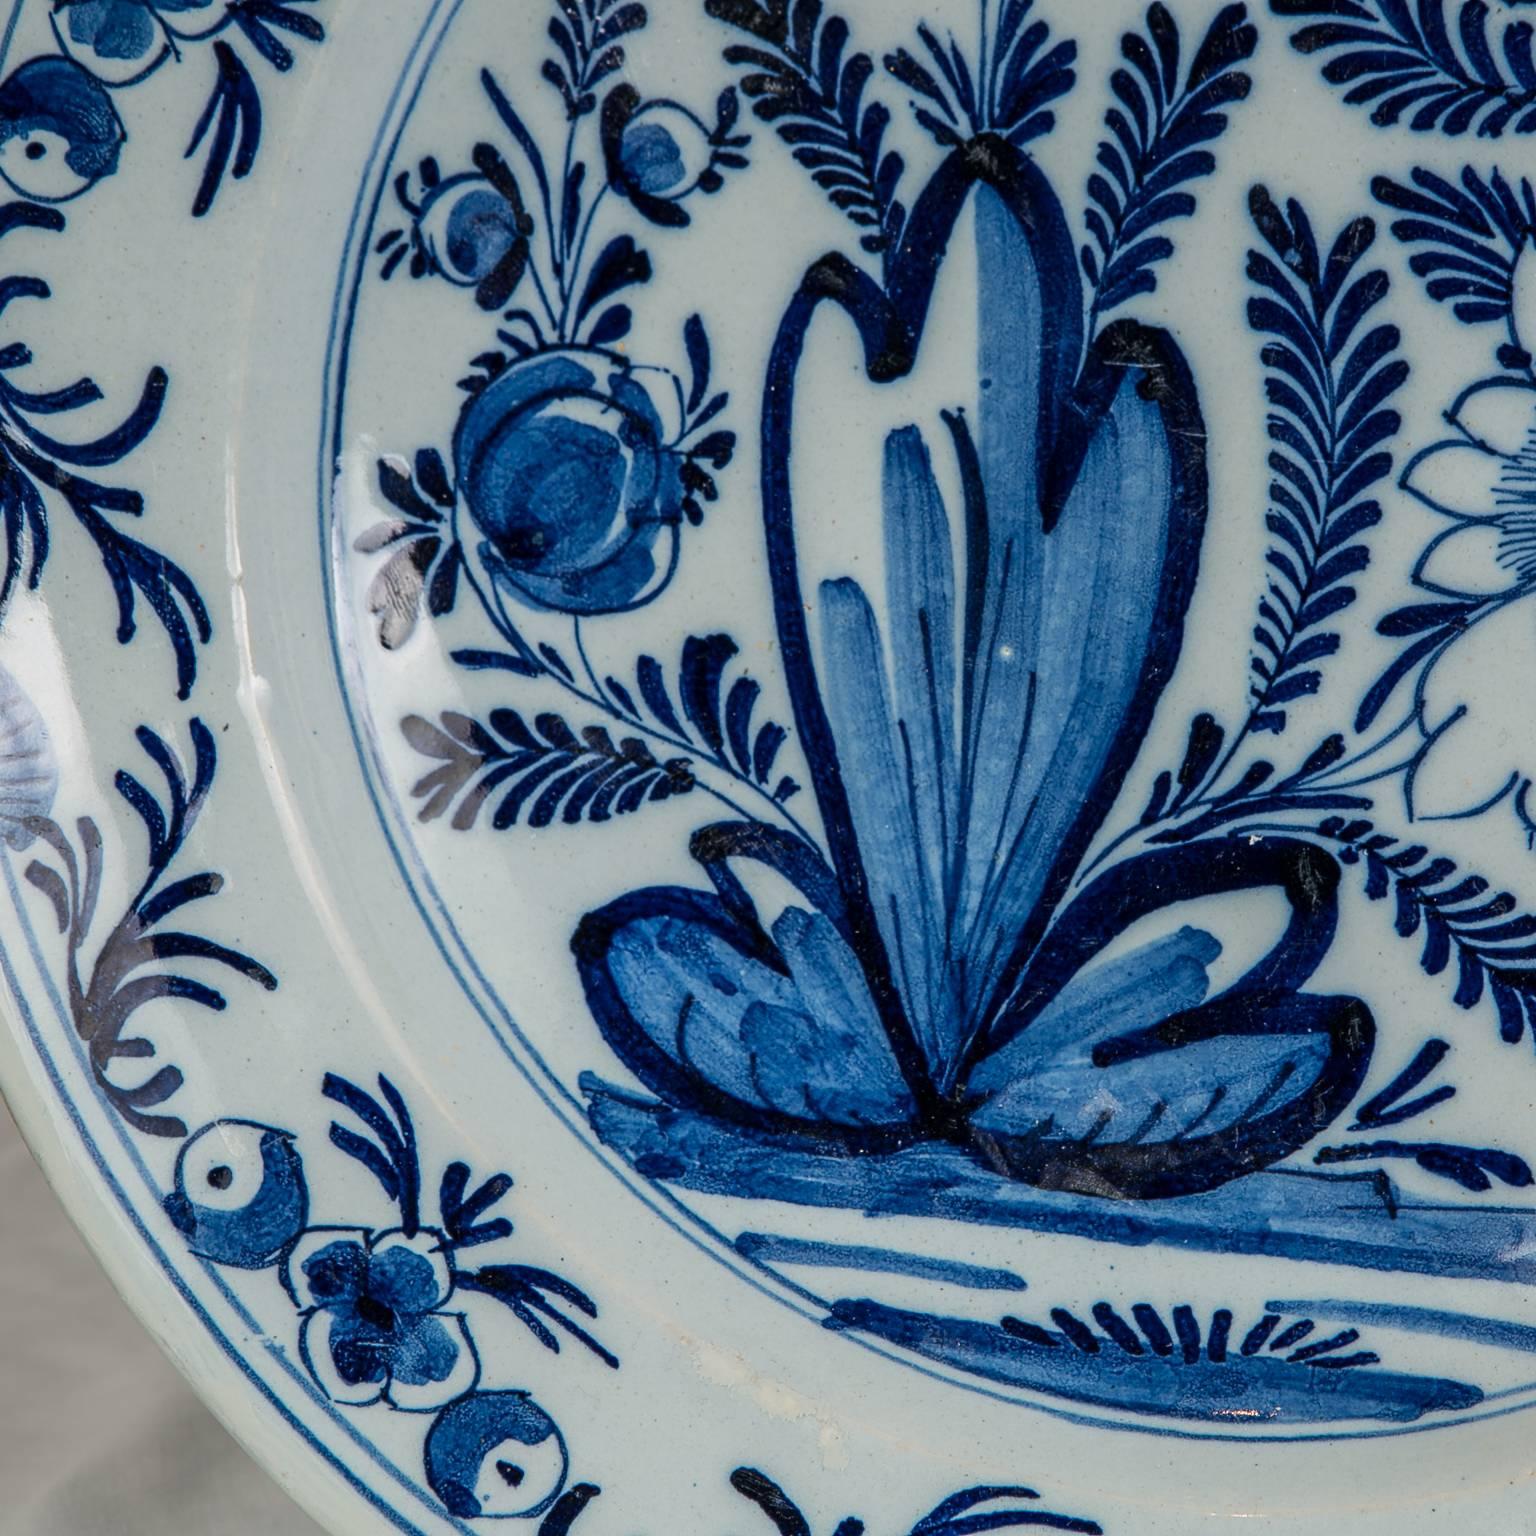 Pair of Blue and White Delft Chargers Made in Netherlands circa 1800 (Chinoiserie)